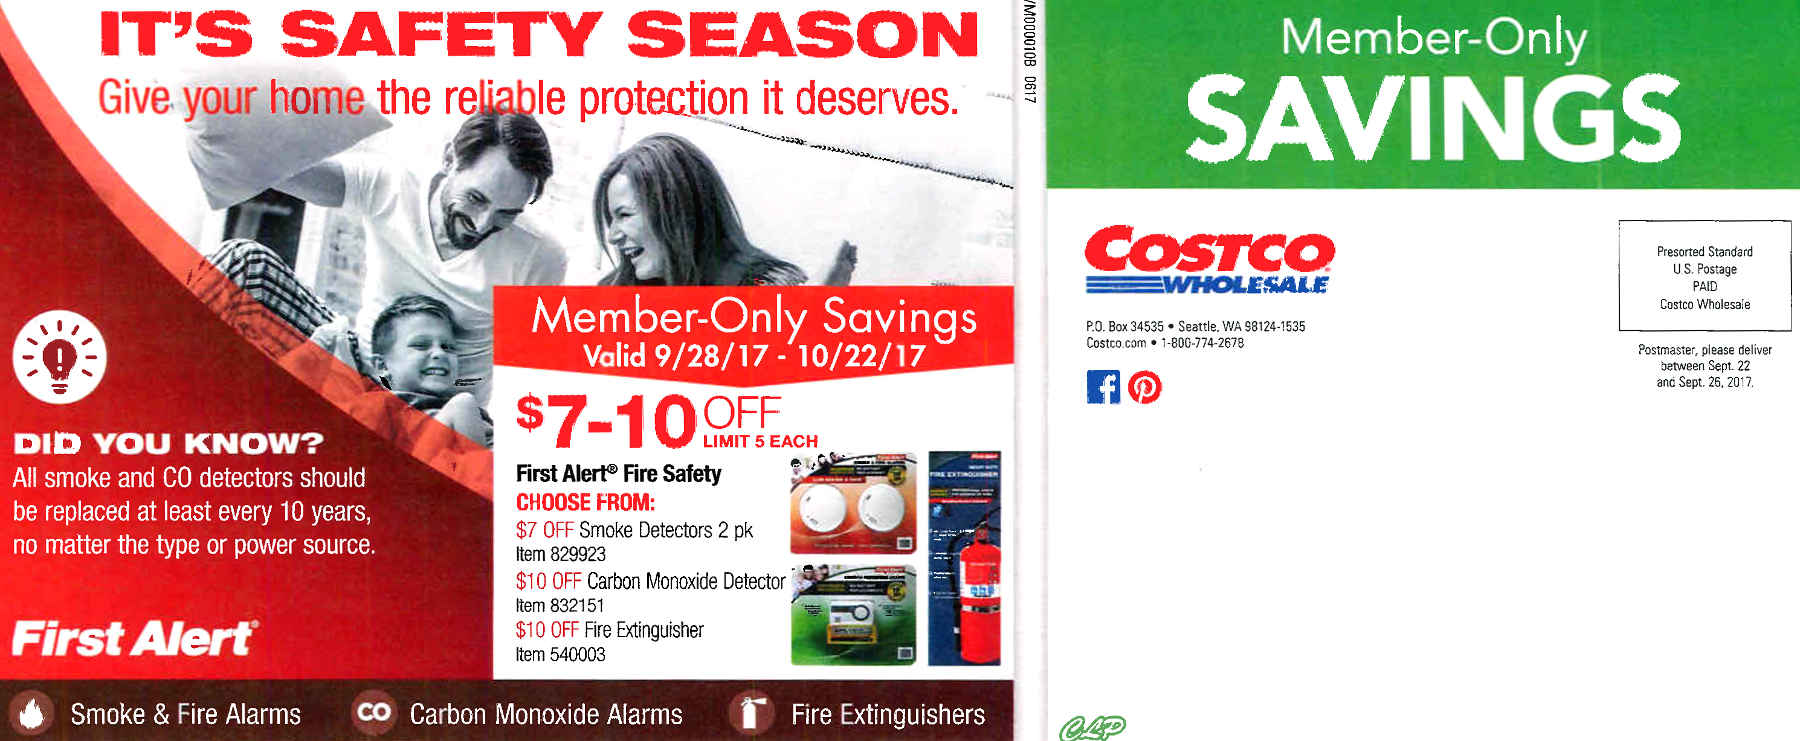 Coupon book full size page -> 23 <-